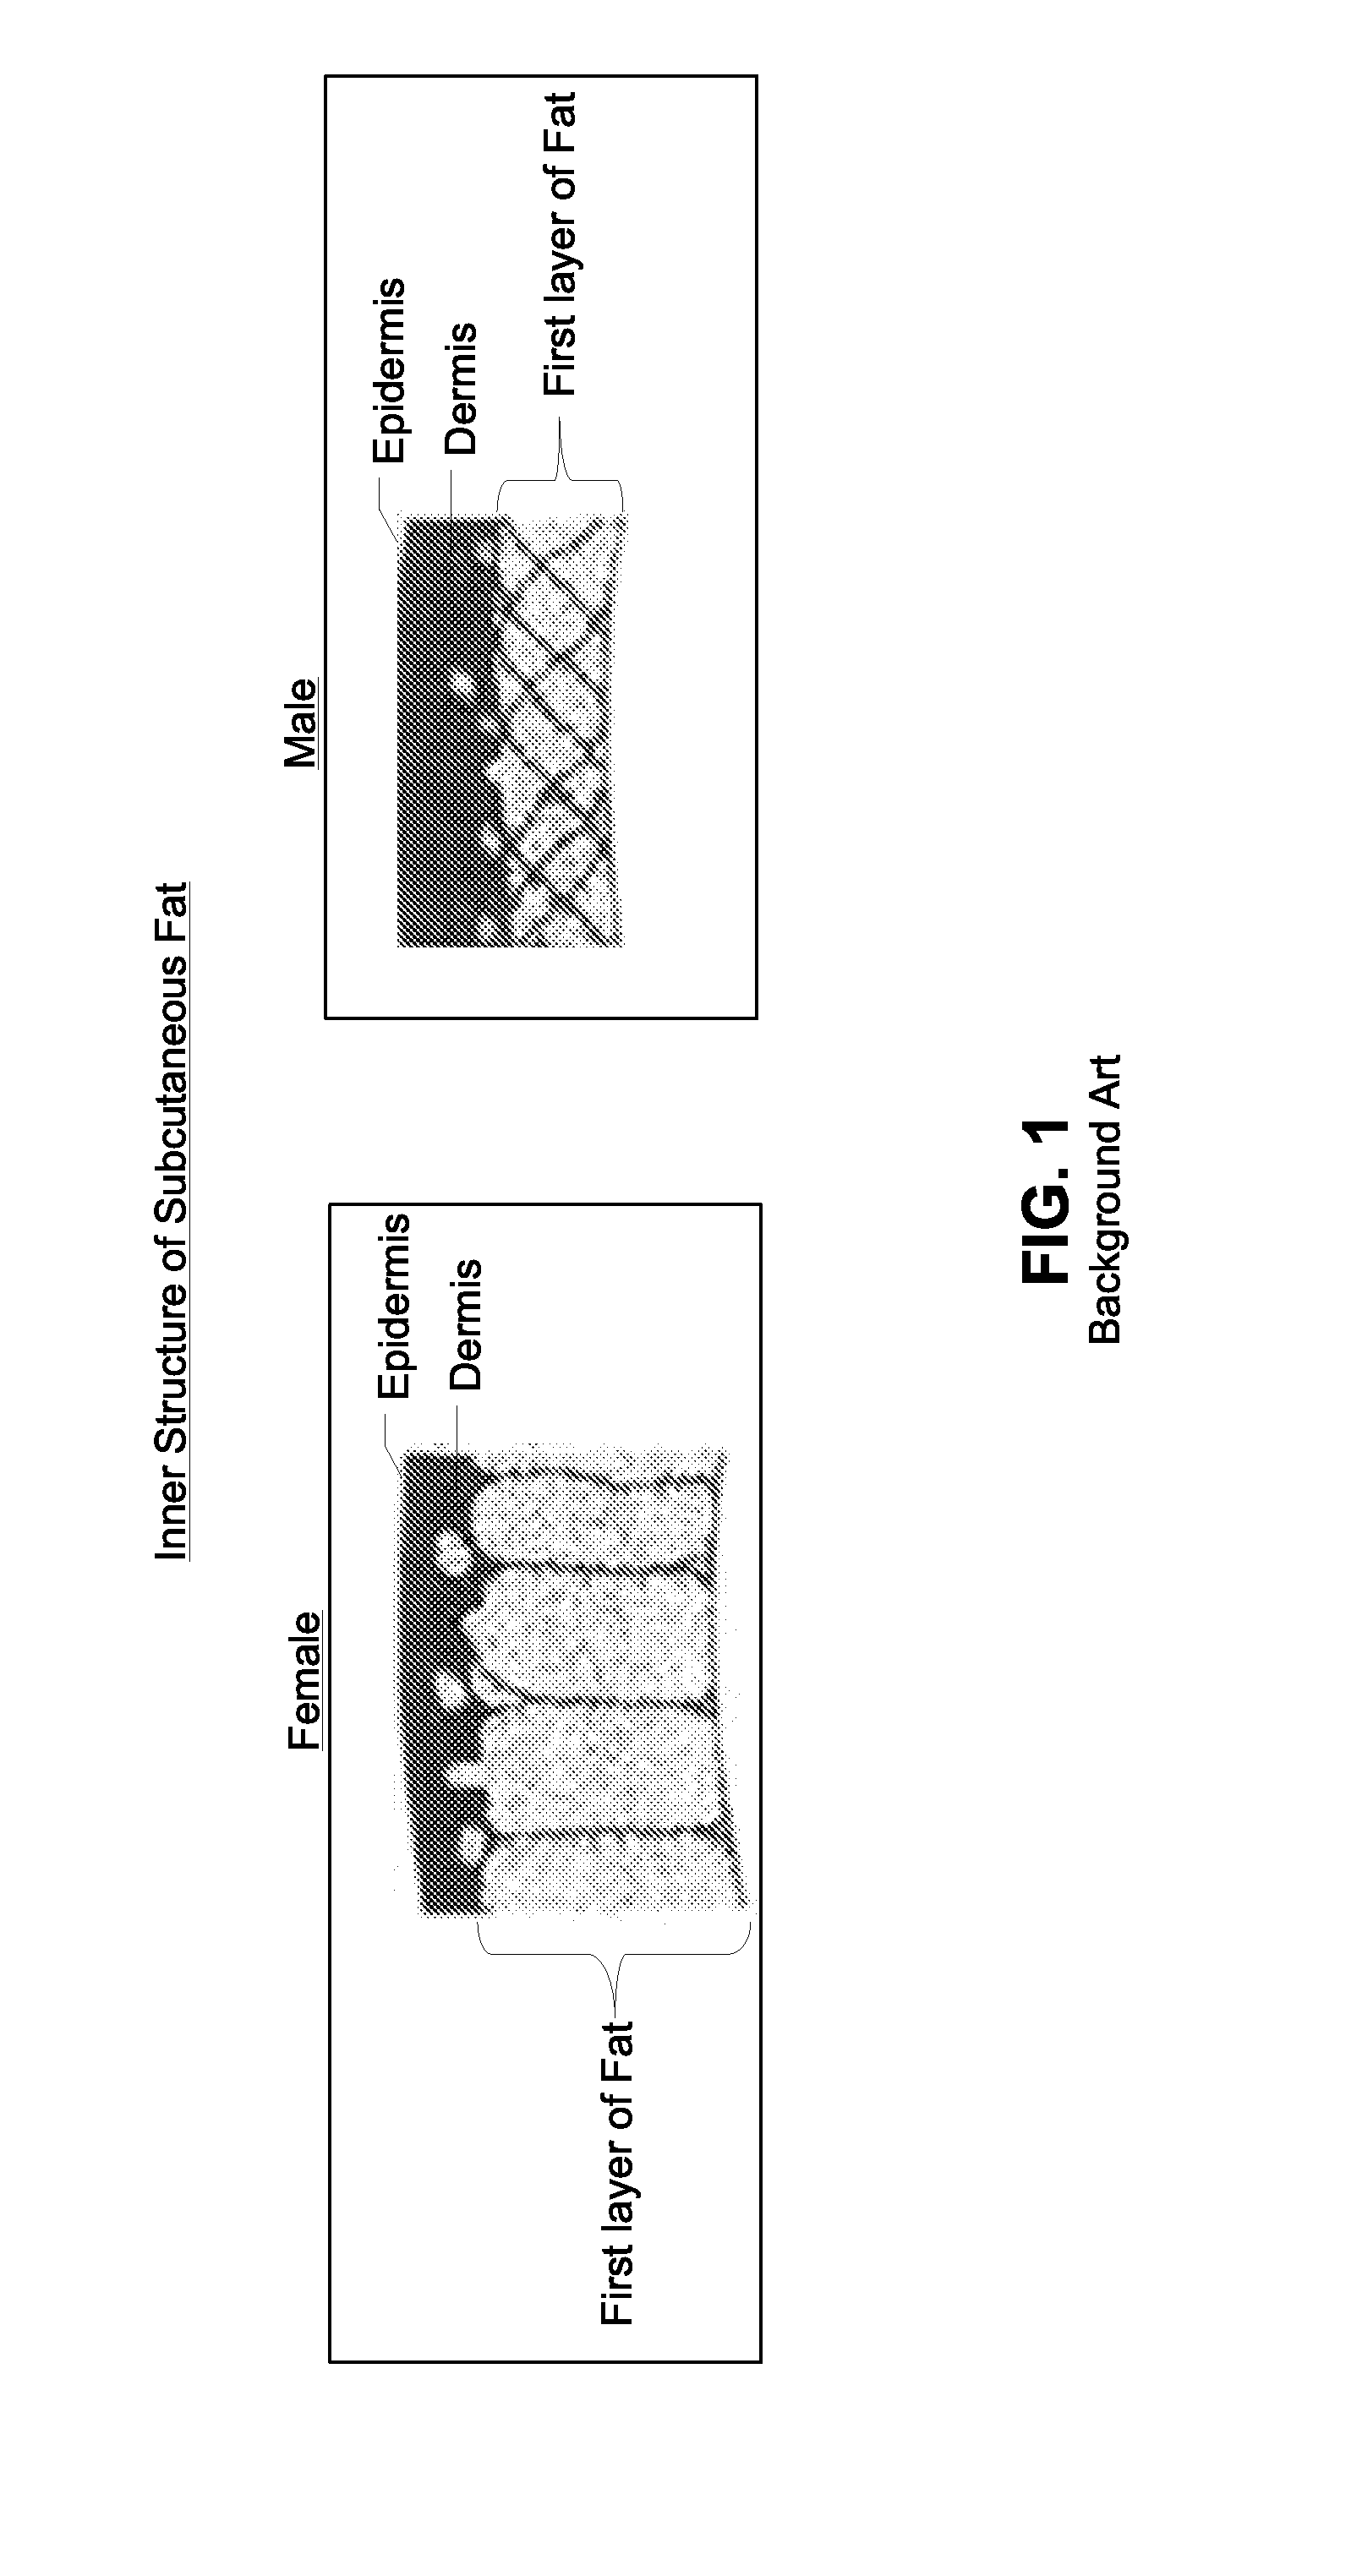 Cellulite and fat reducing device and method utilizing optical emitters